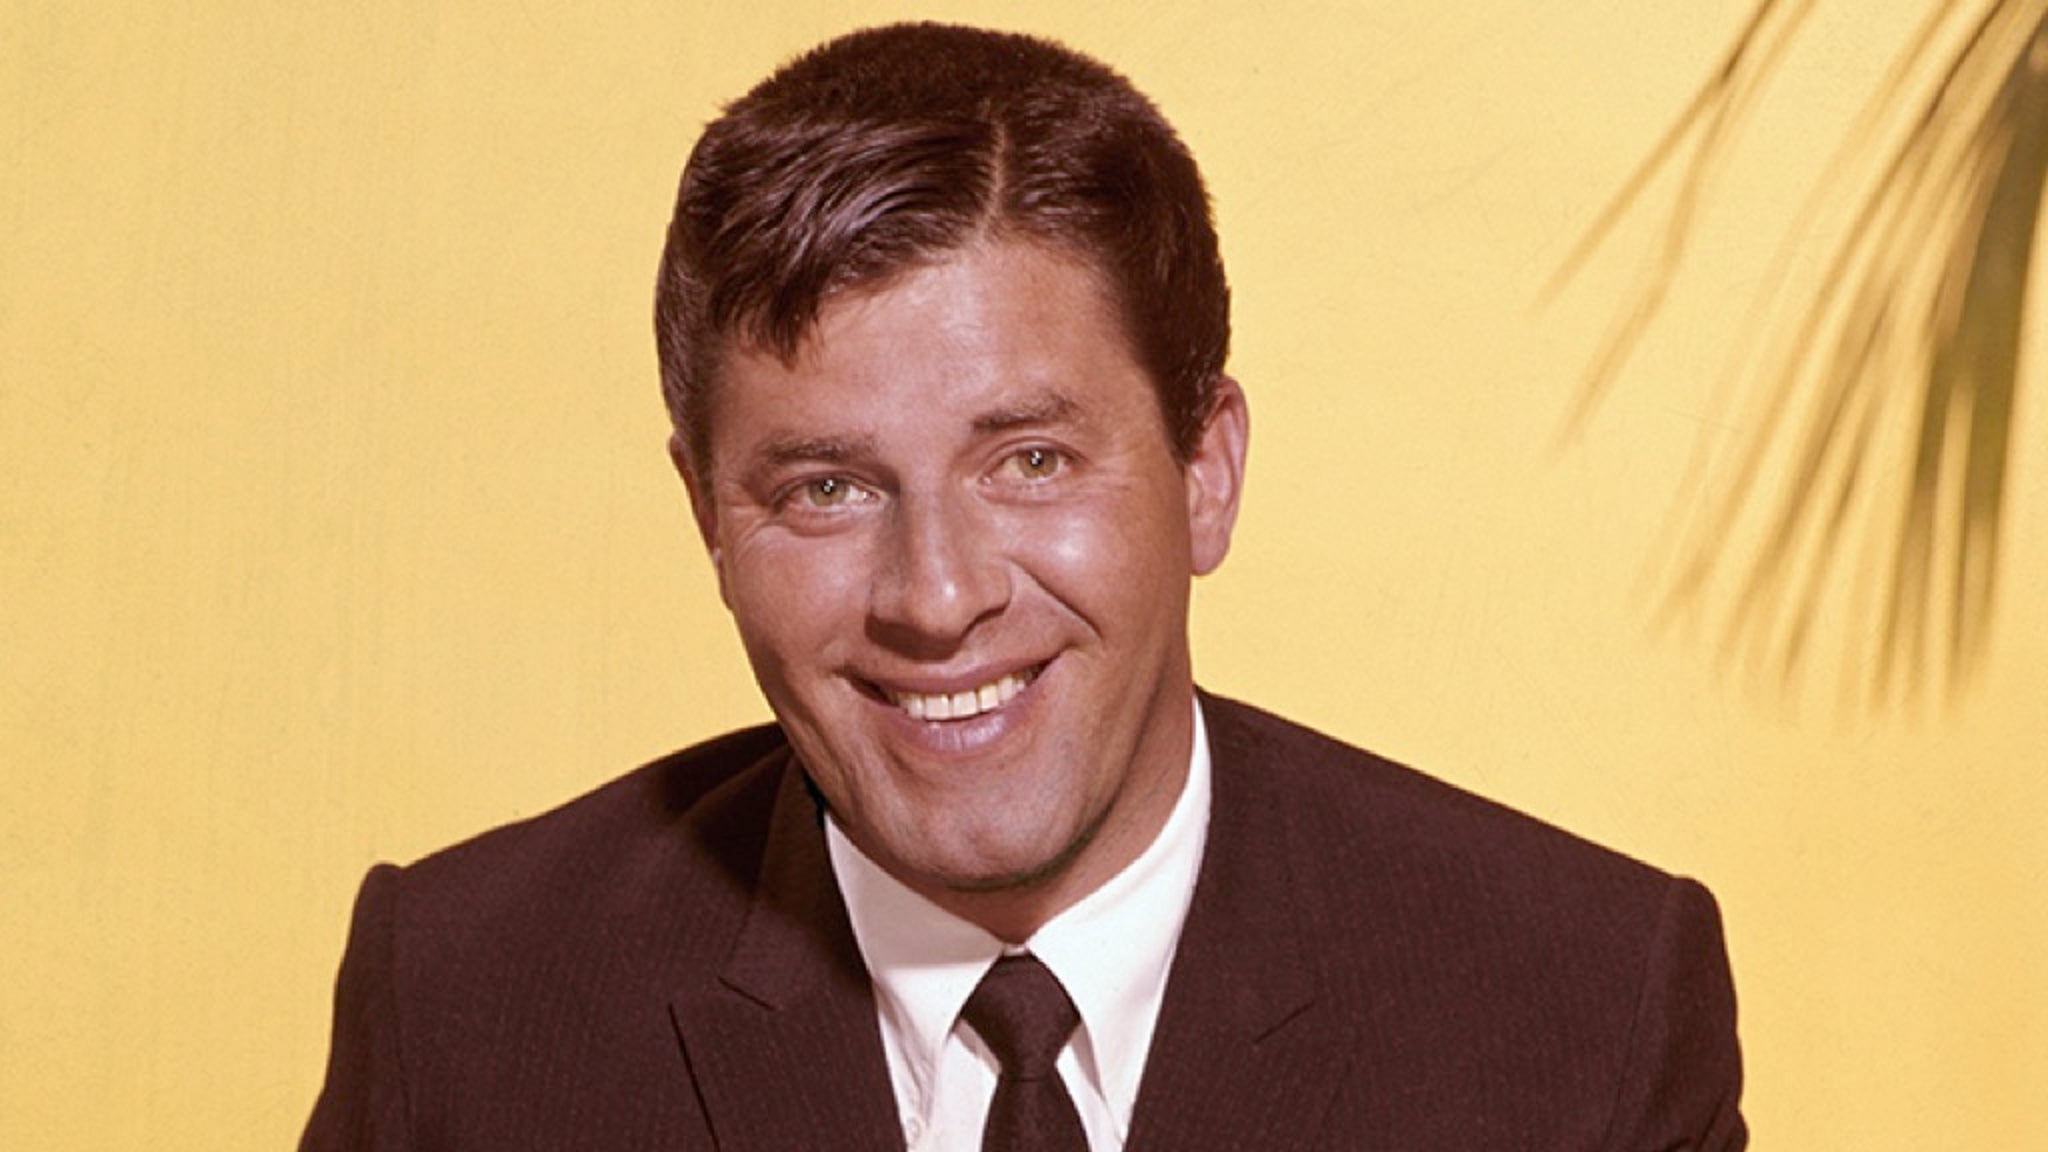 Remembering Jerry Lewis